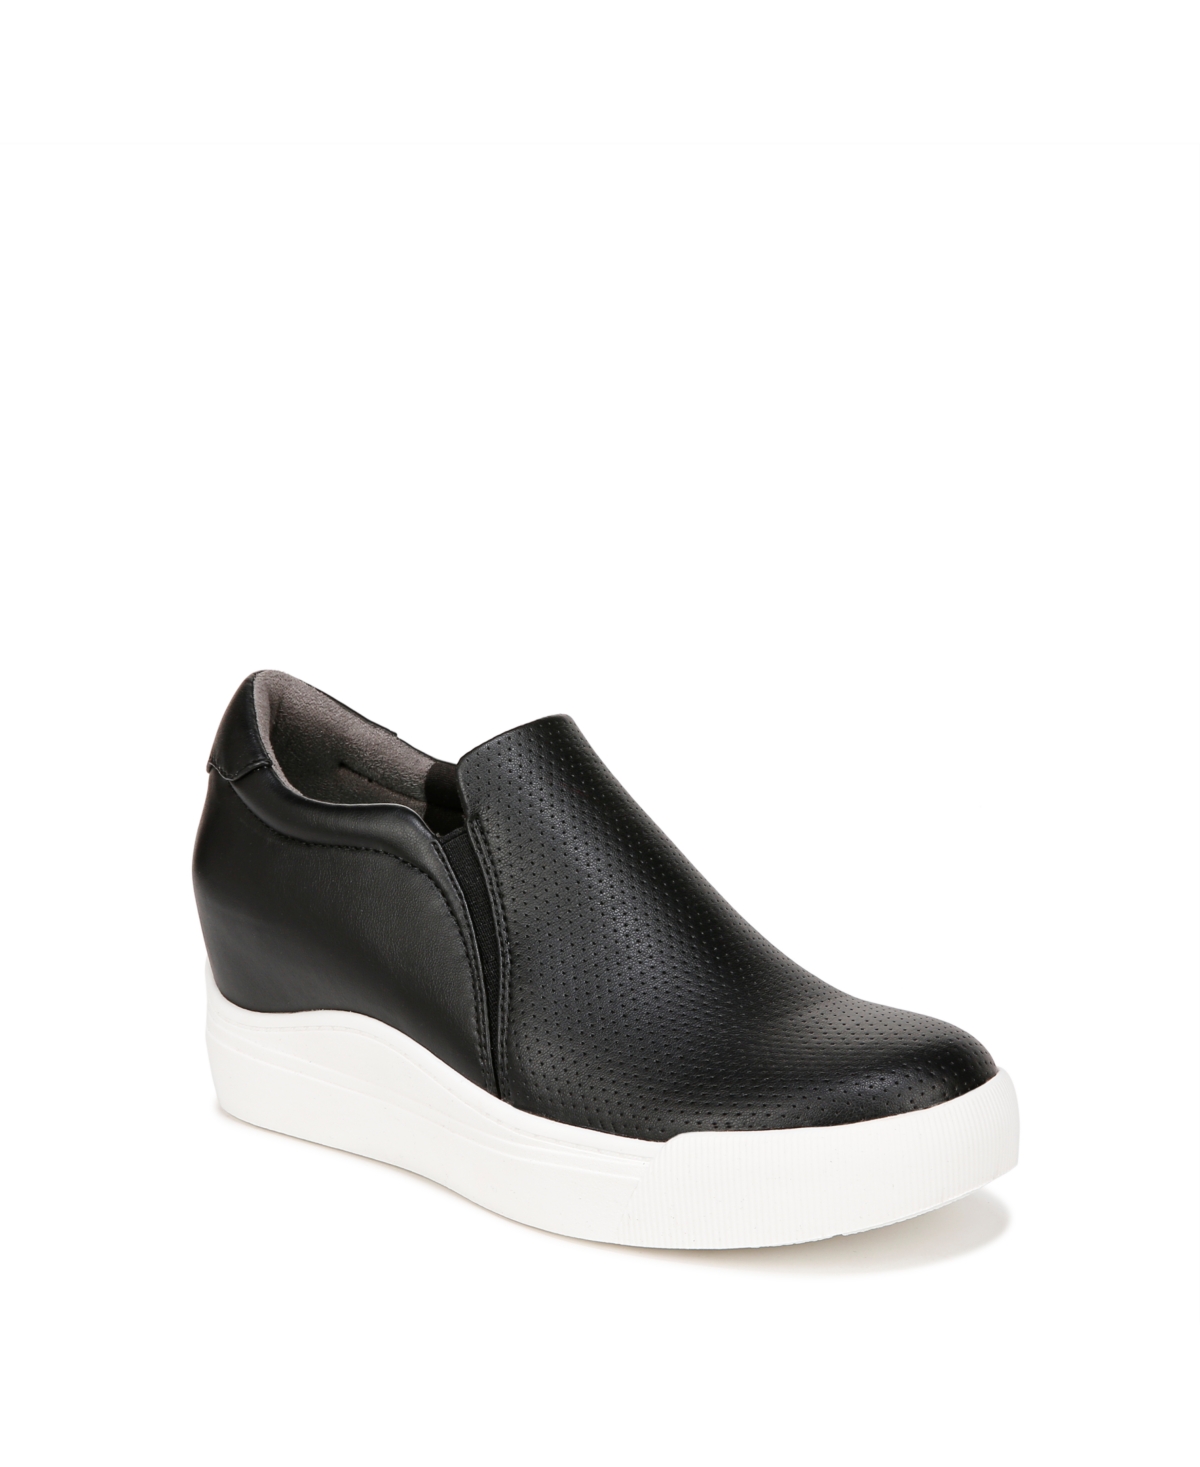 Dr. Scholl's Women's Time Off Wedge Slip-on Sneakers In Black Faux Leather